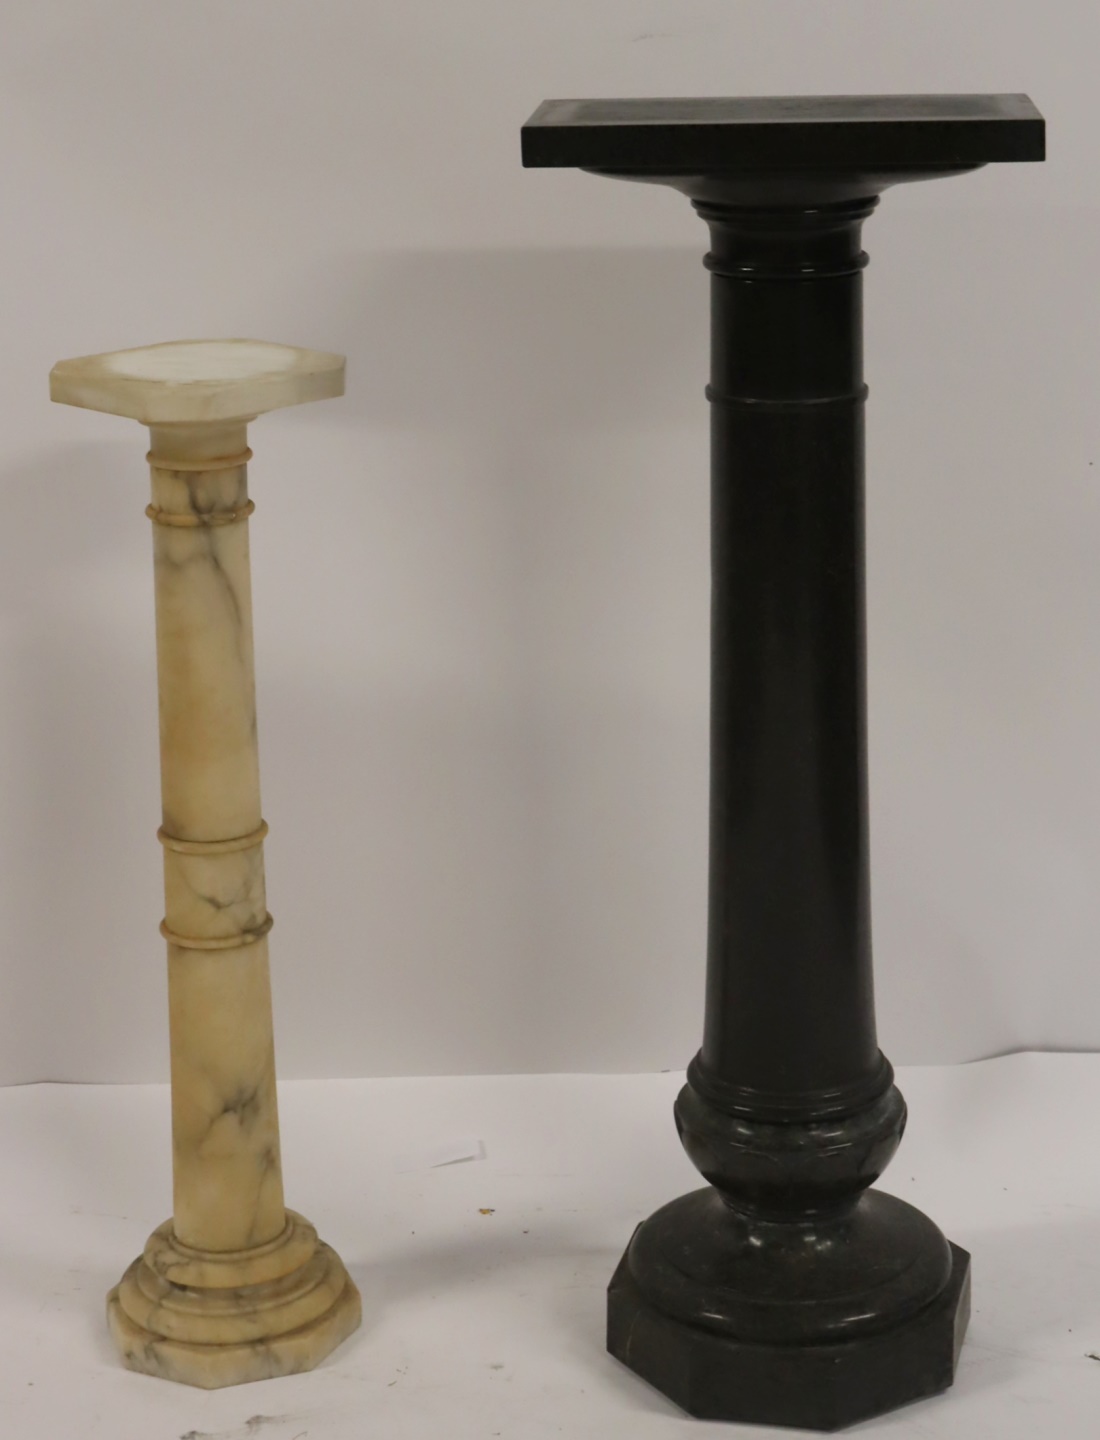 2 ANTIQUE MARBLE PEDESTALS From 3b775d